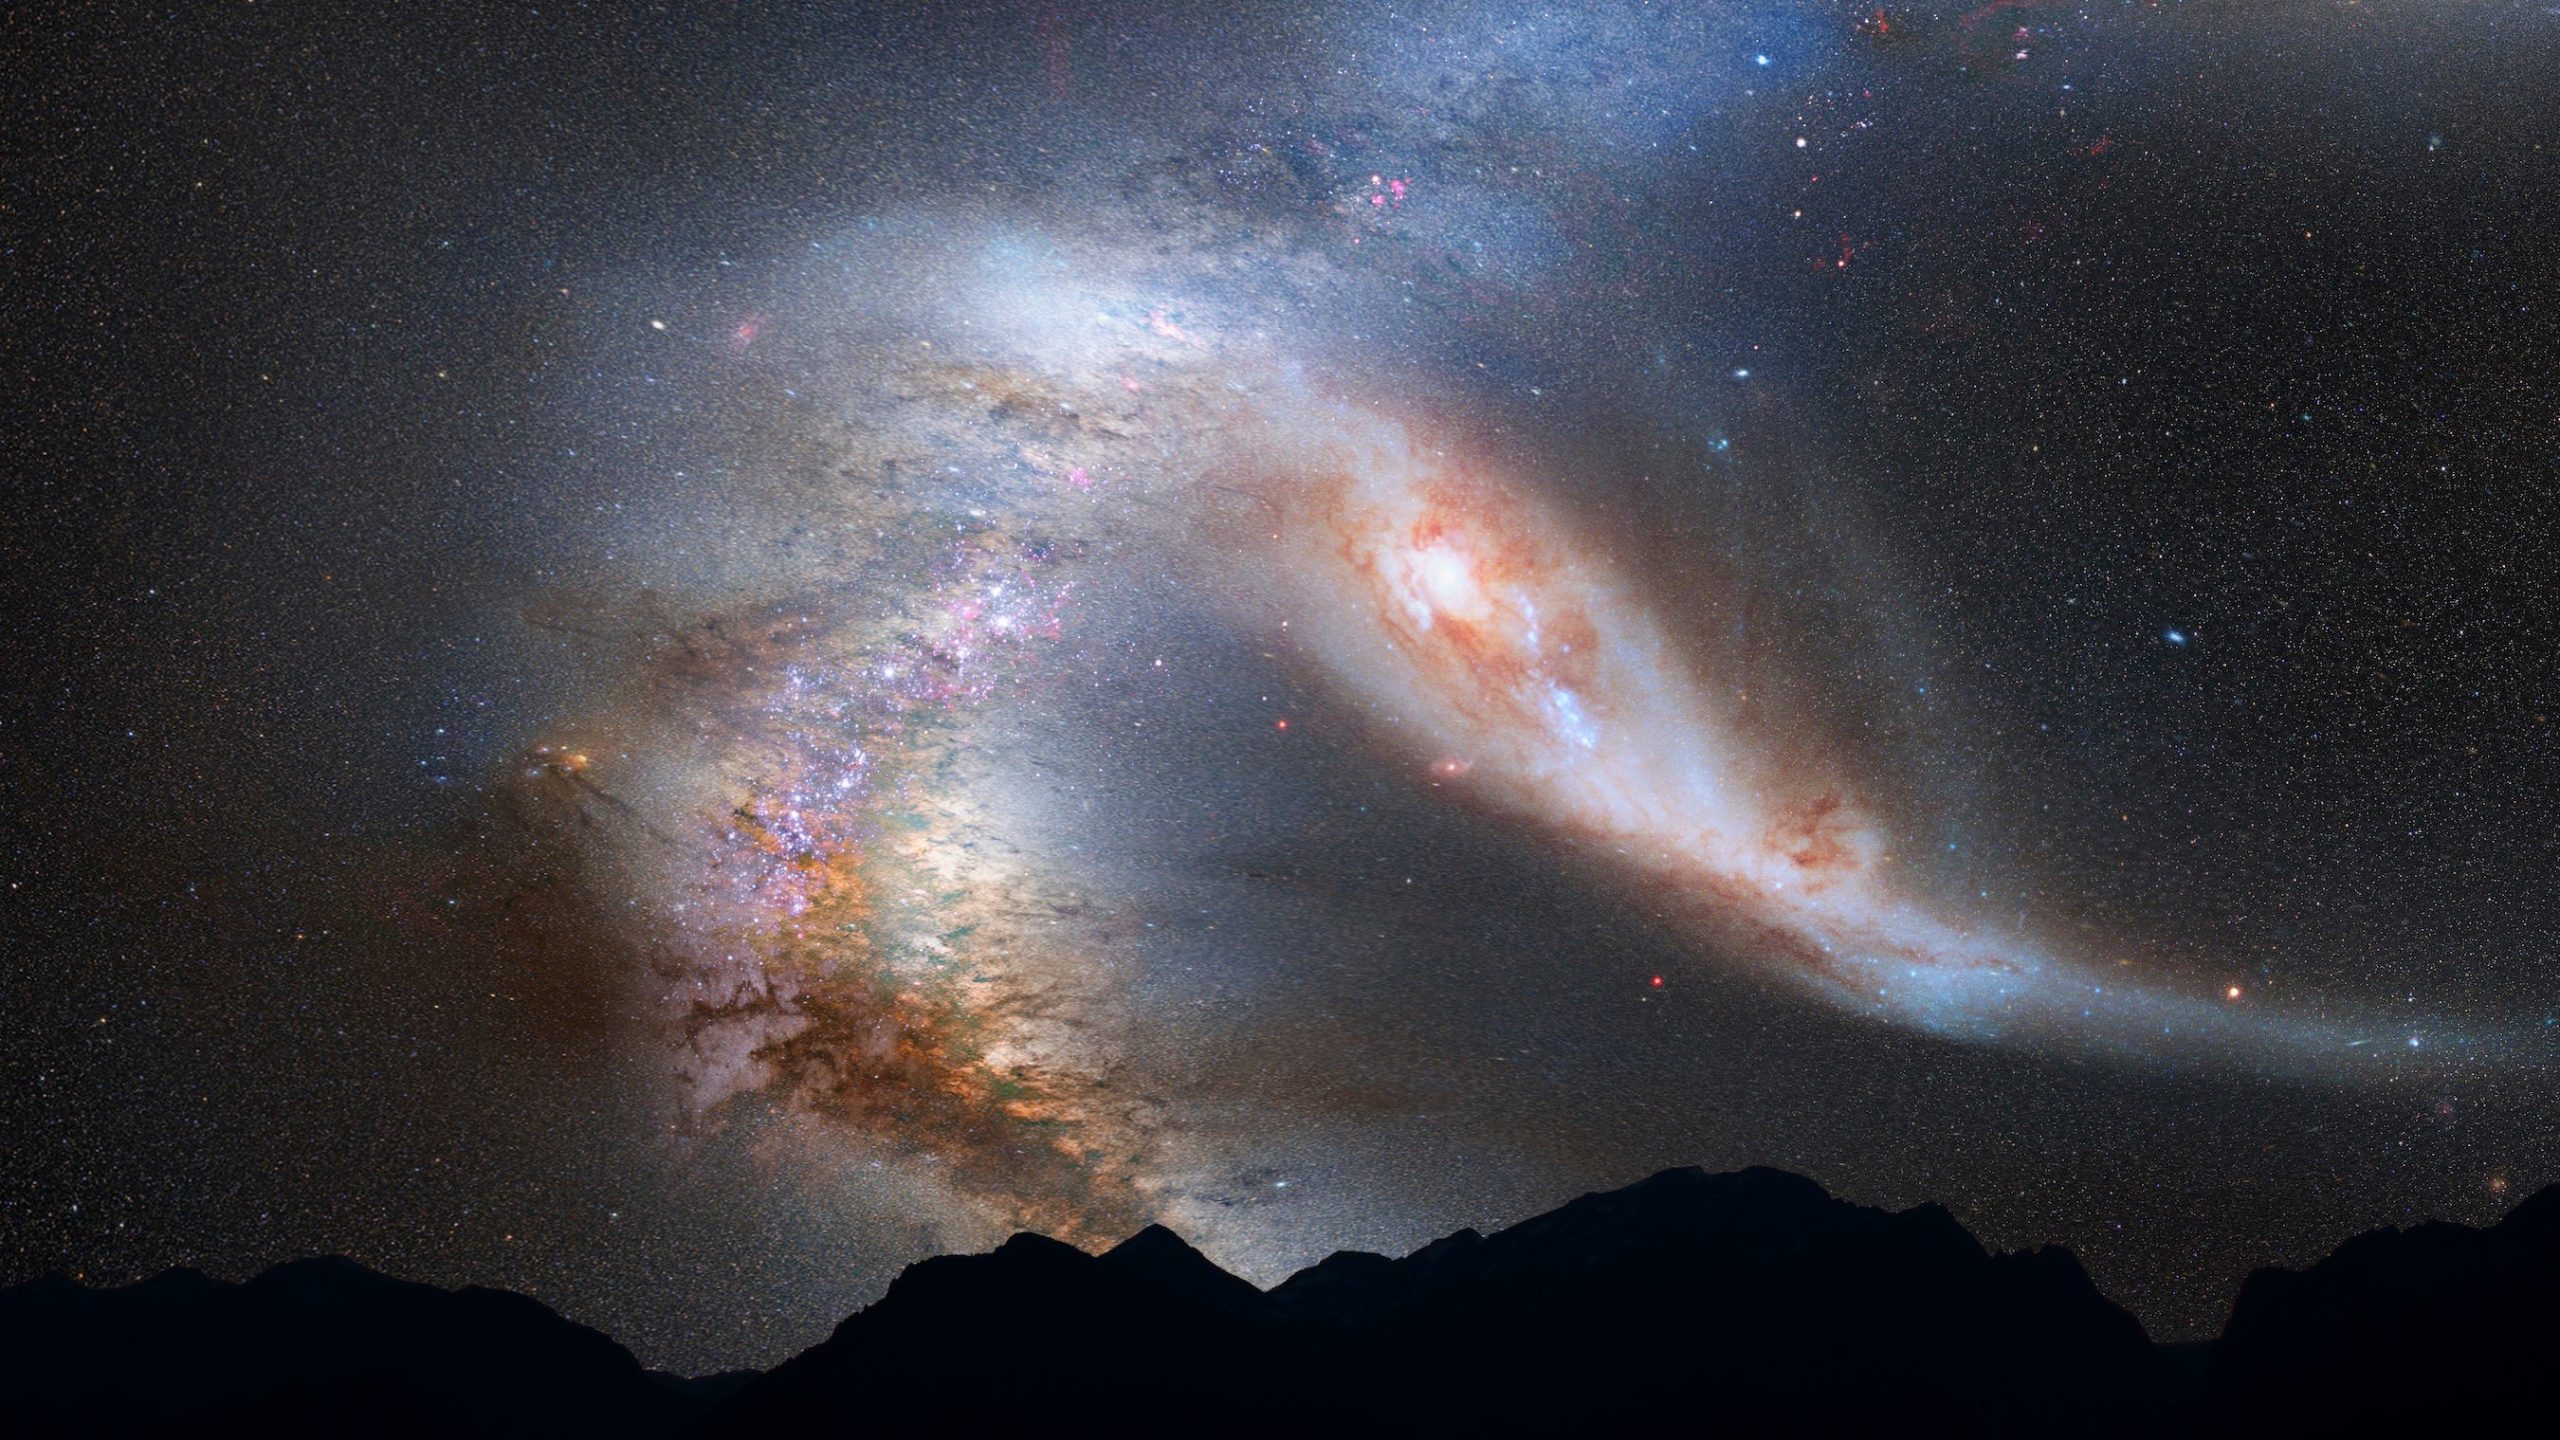 milky way and andromeda galaxies colliding in night sky illustration